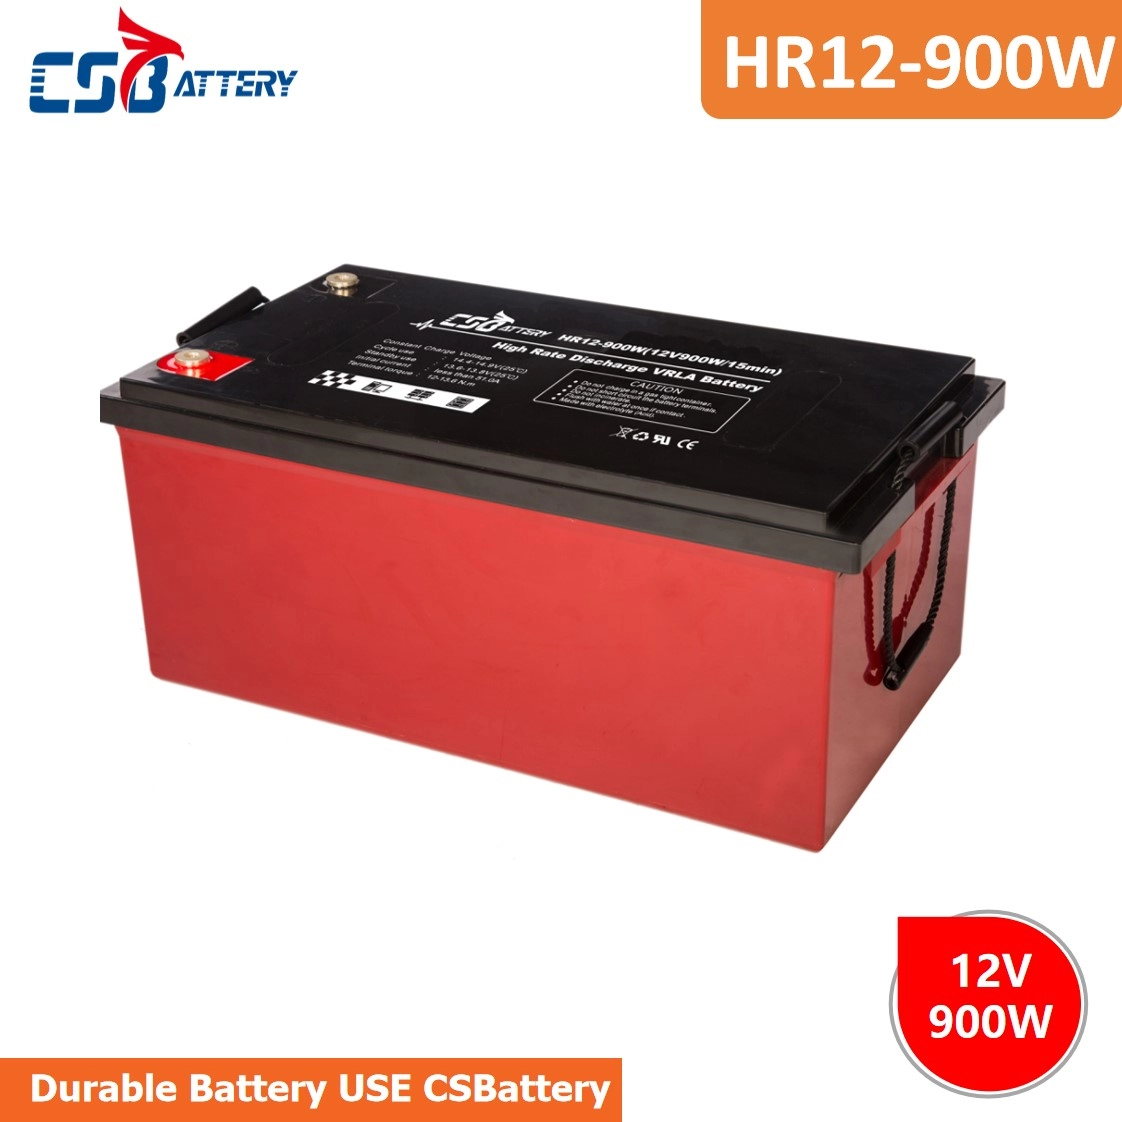 HR12-900W High Discharge Rate Battery